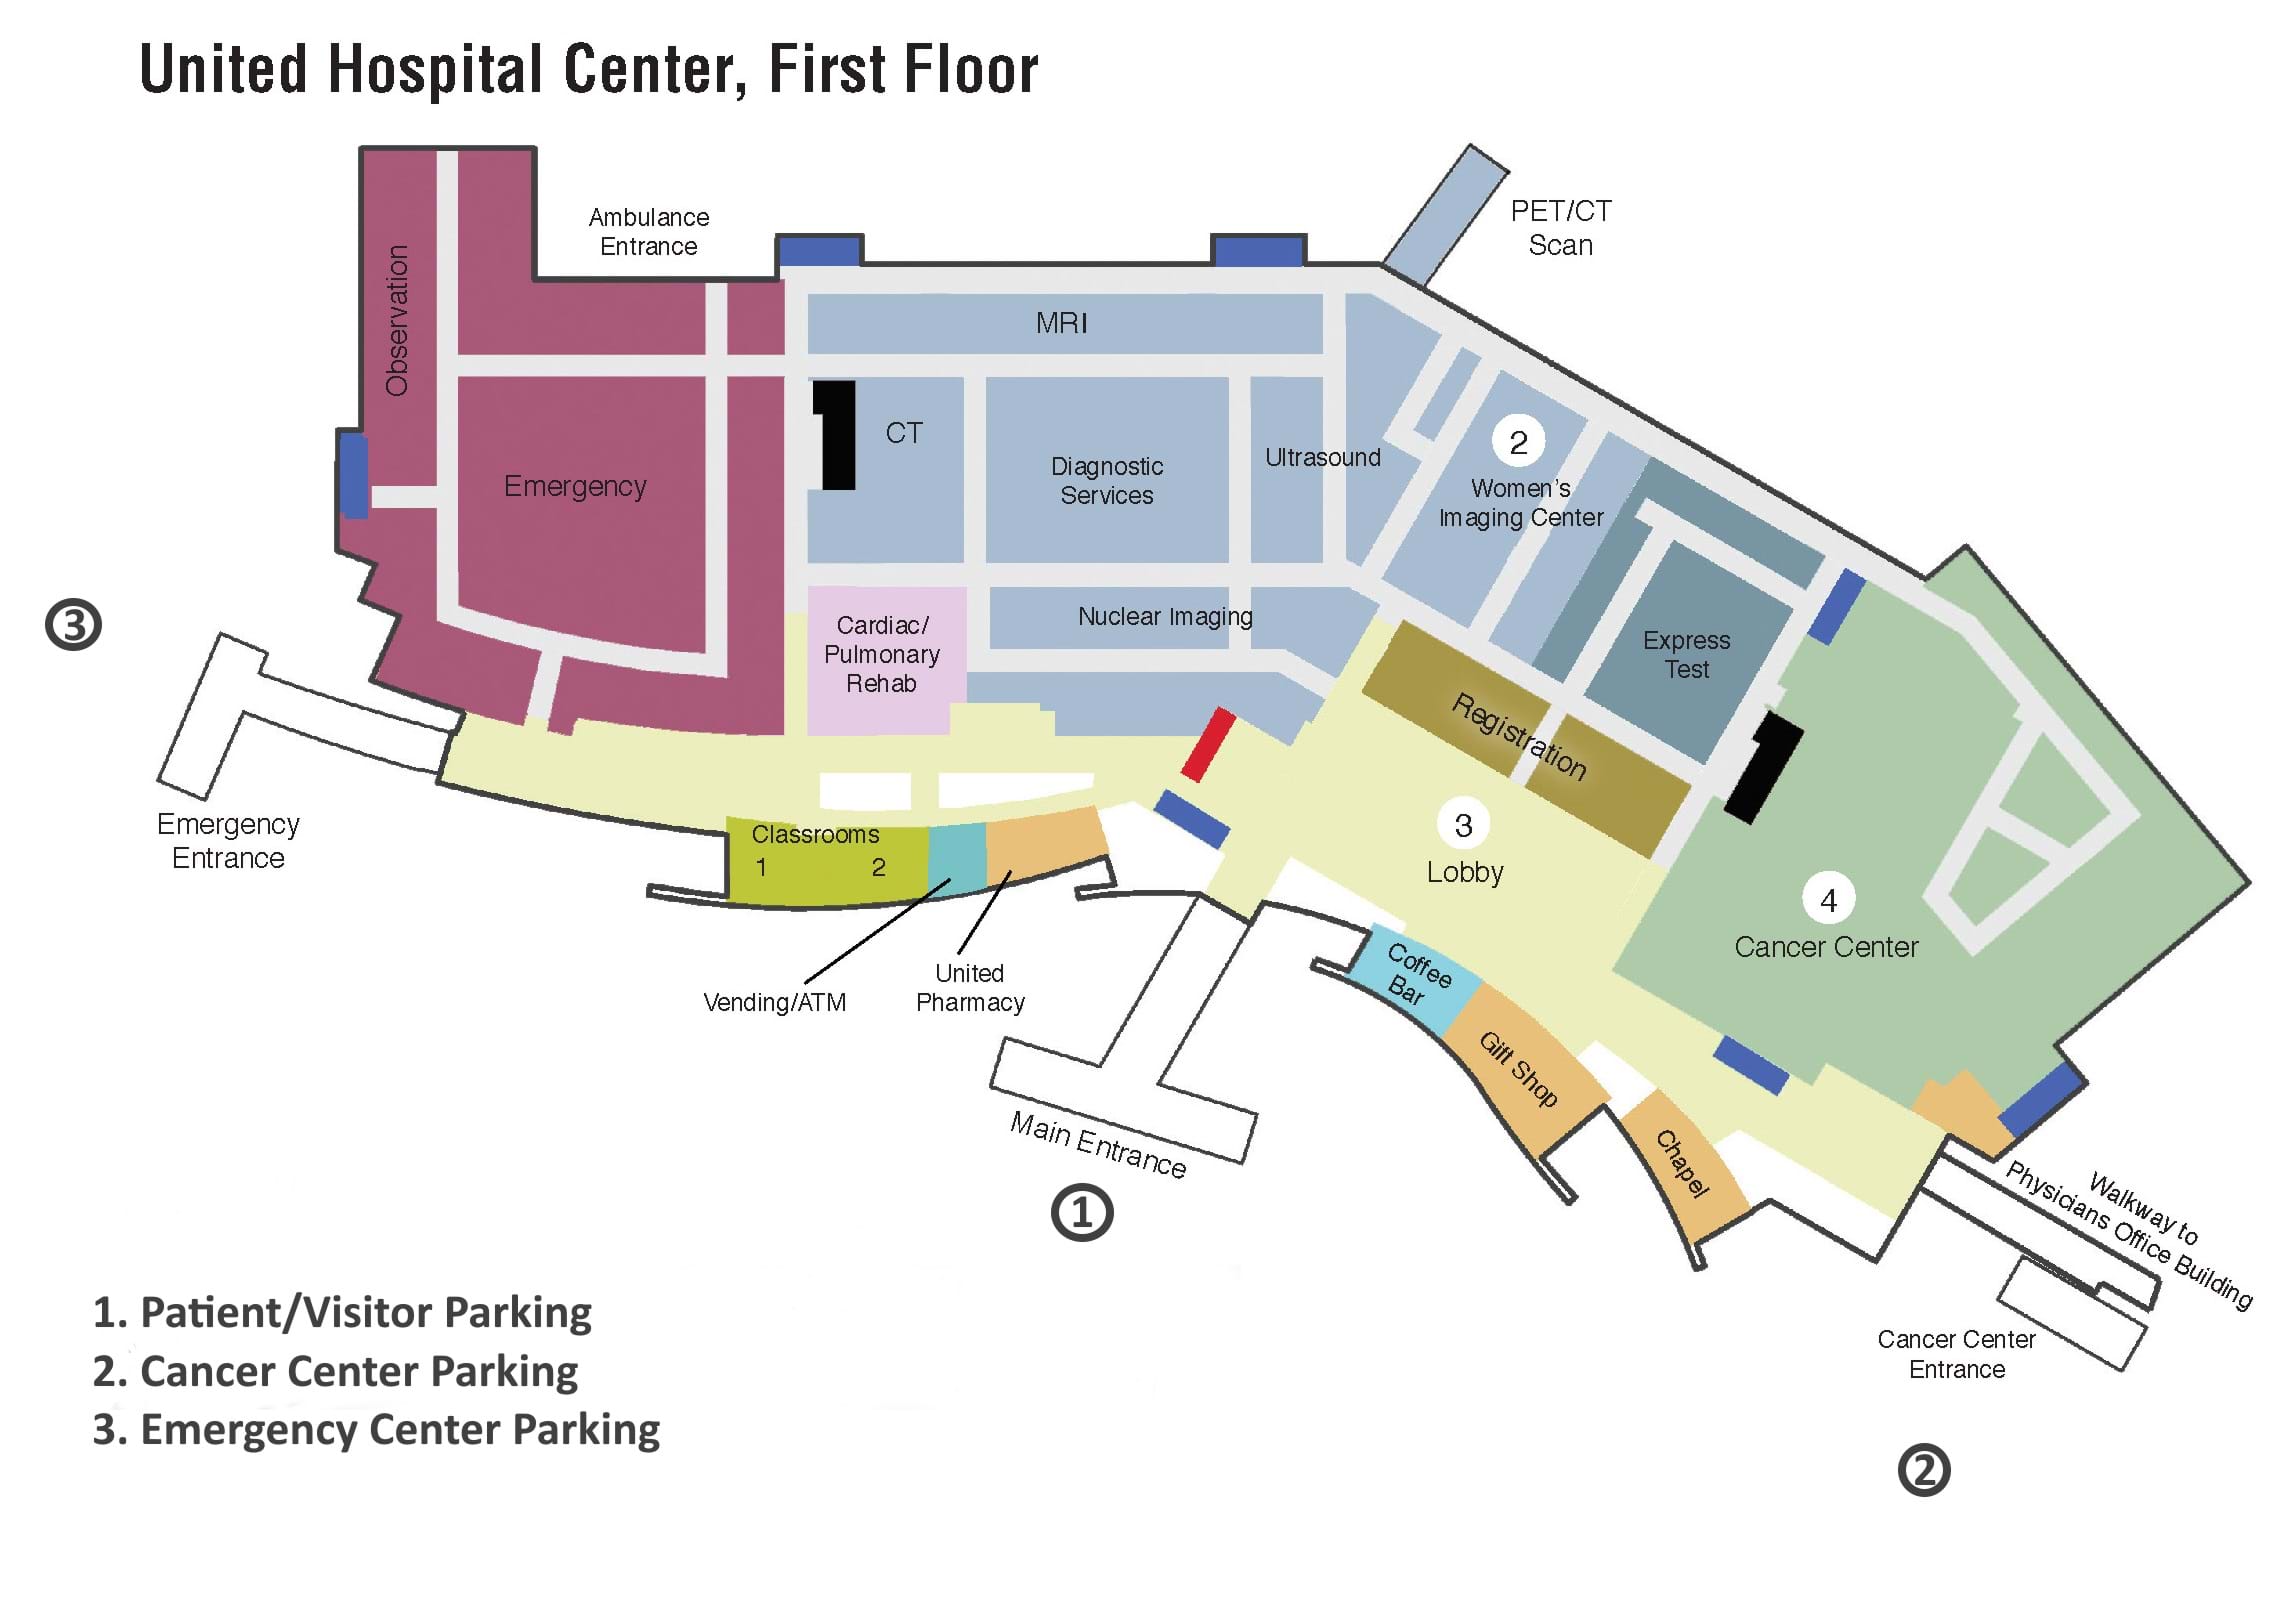 Maps & Directions United Hospital Center